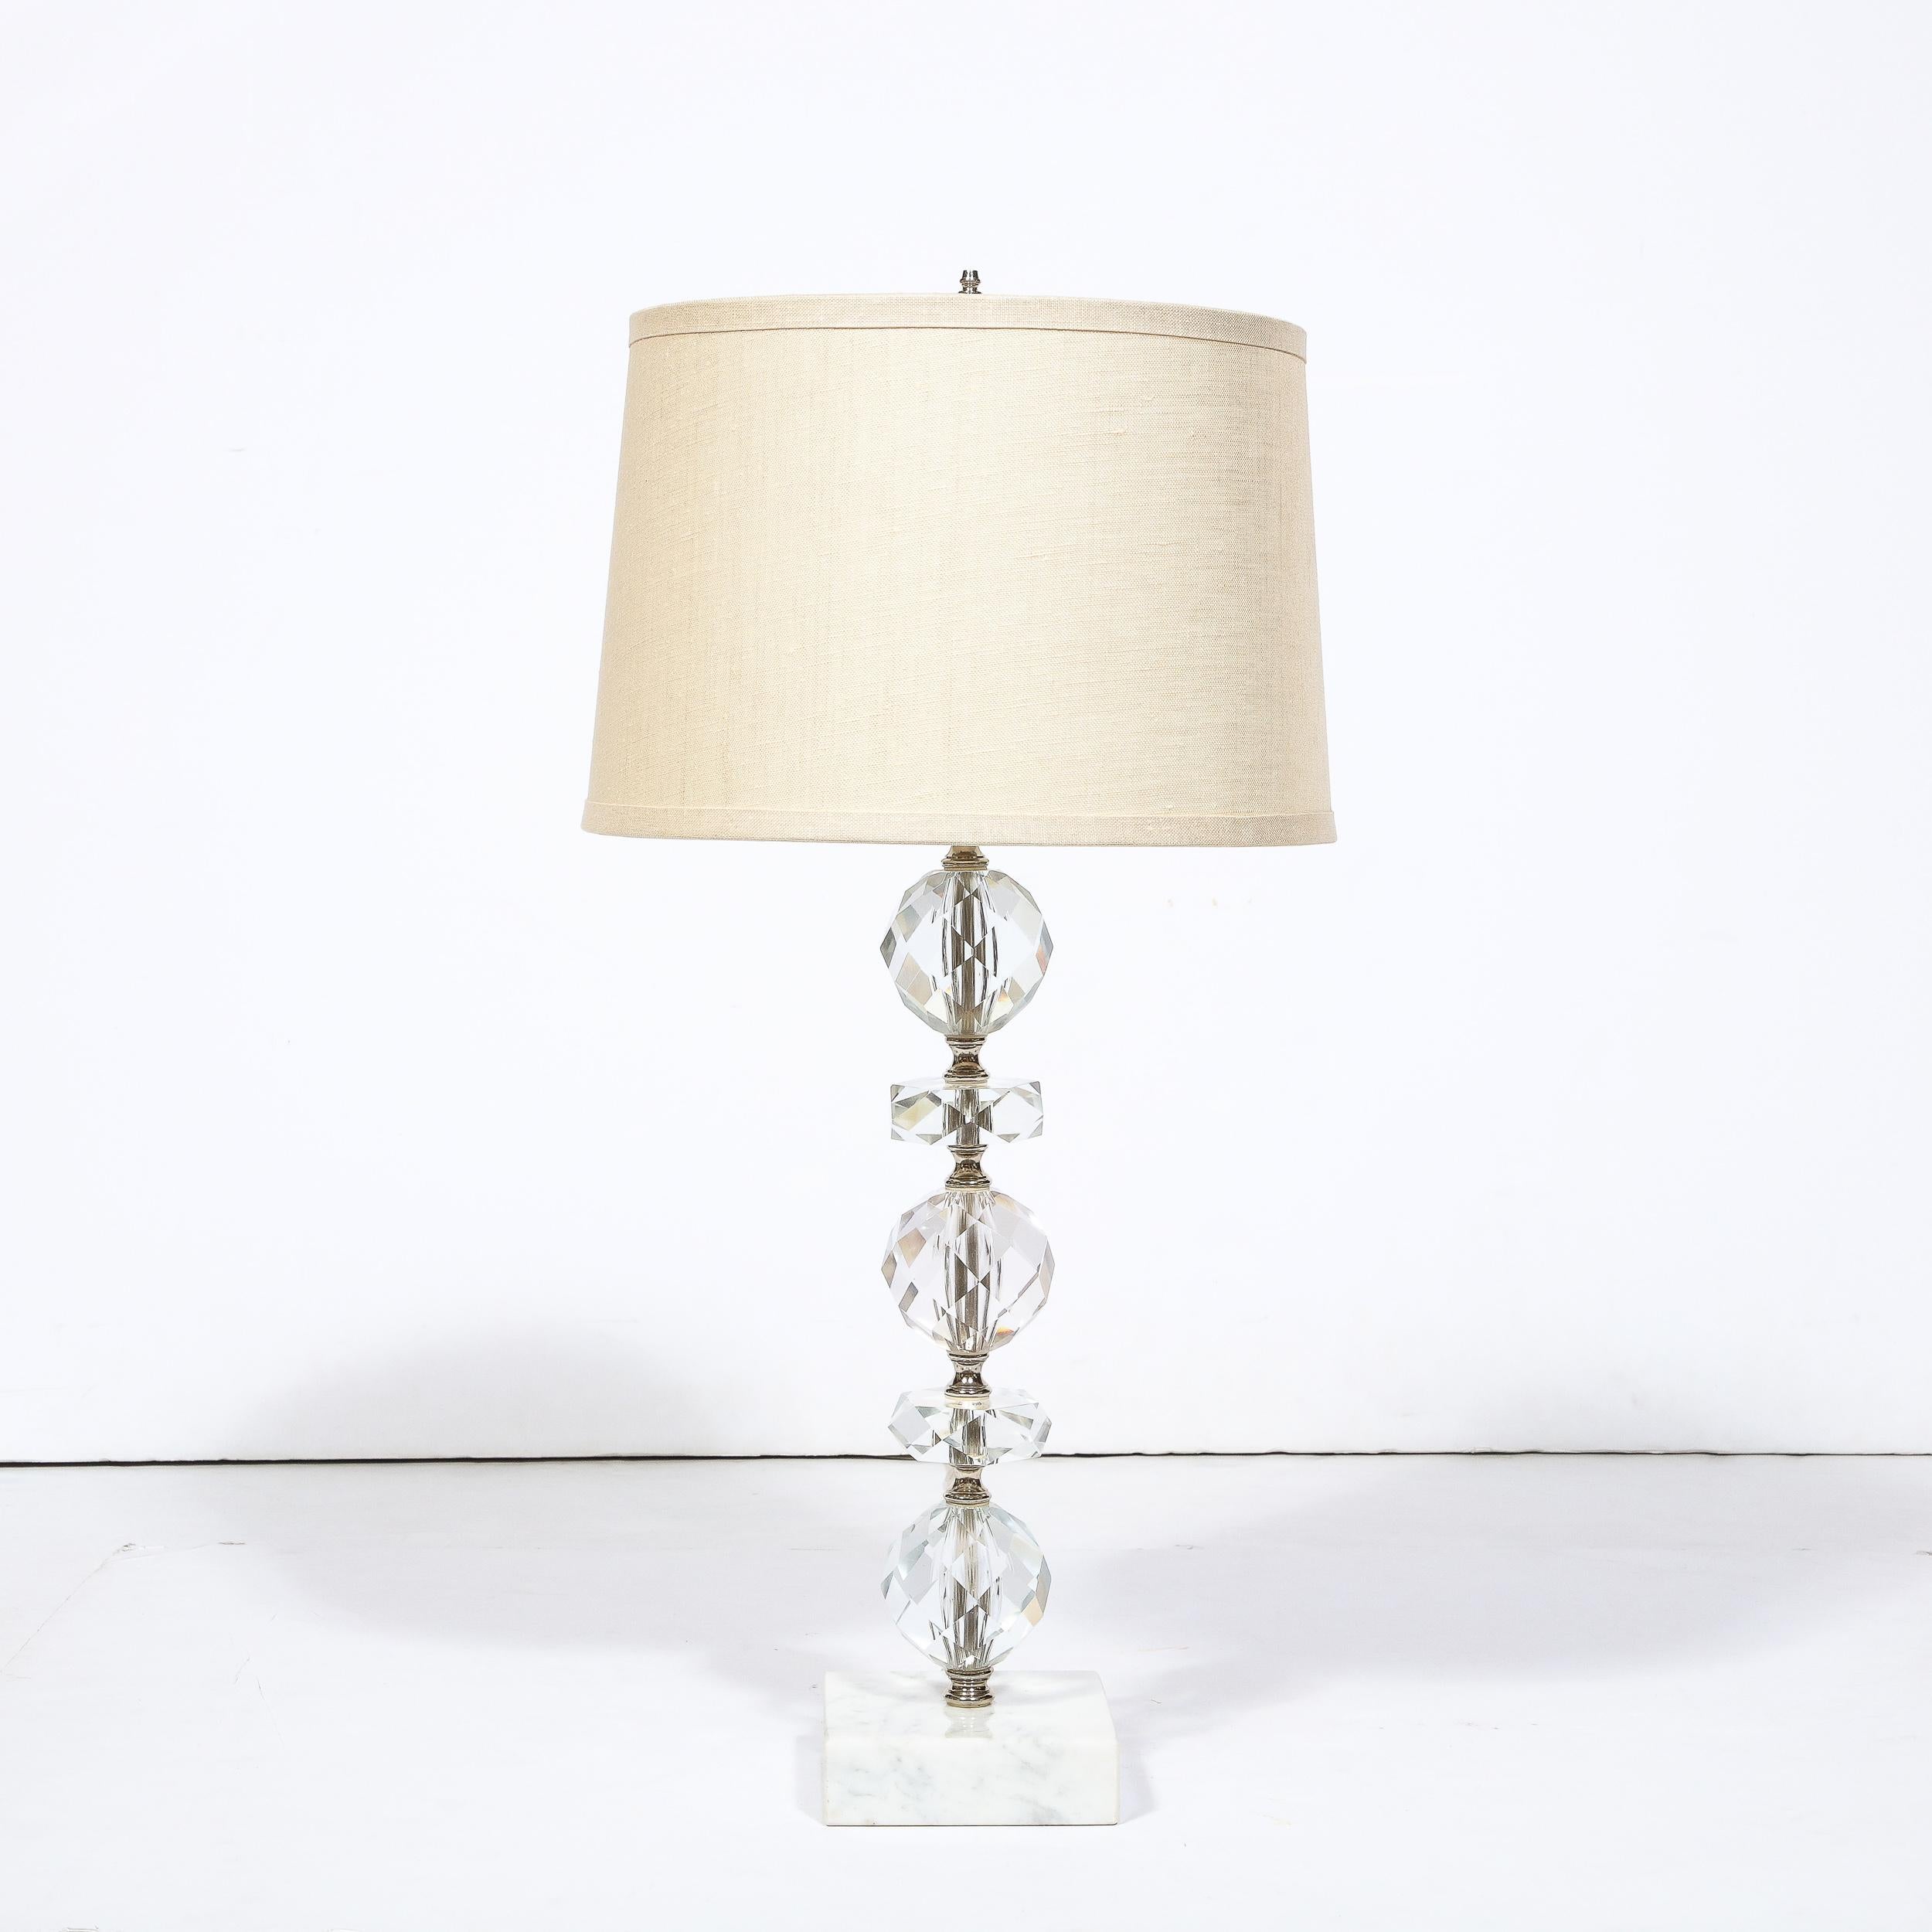 This lovely Art Deco Table Lamp in Faceted Cut Crystal and Marble Base originates from the United States, Circa 1945. Featuring a body composed of Cut Crystal in alternating spherical and flattened elements rising from a rectilinear base of Carrara